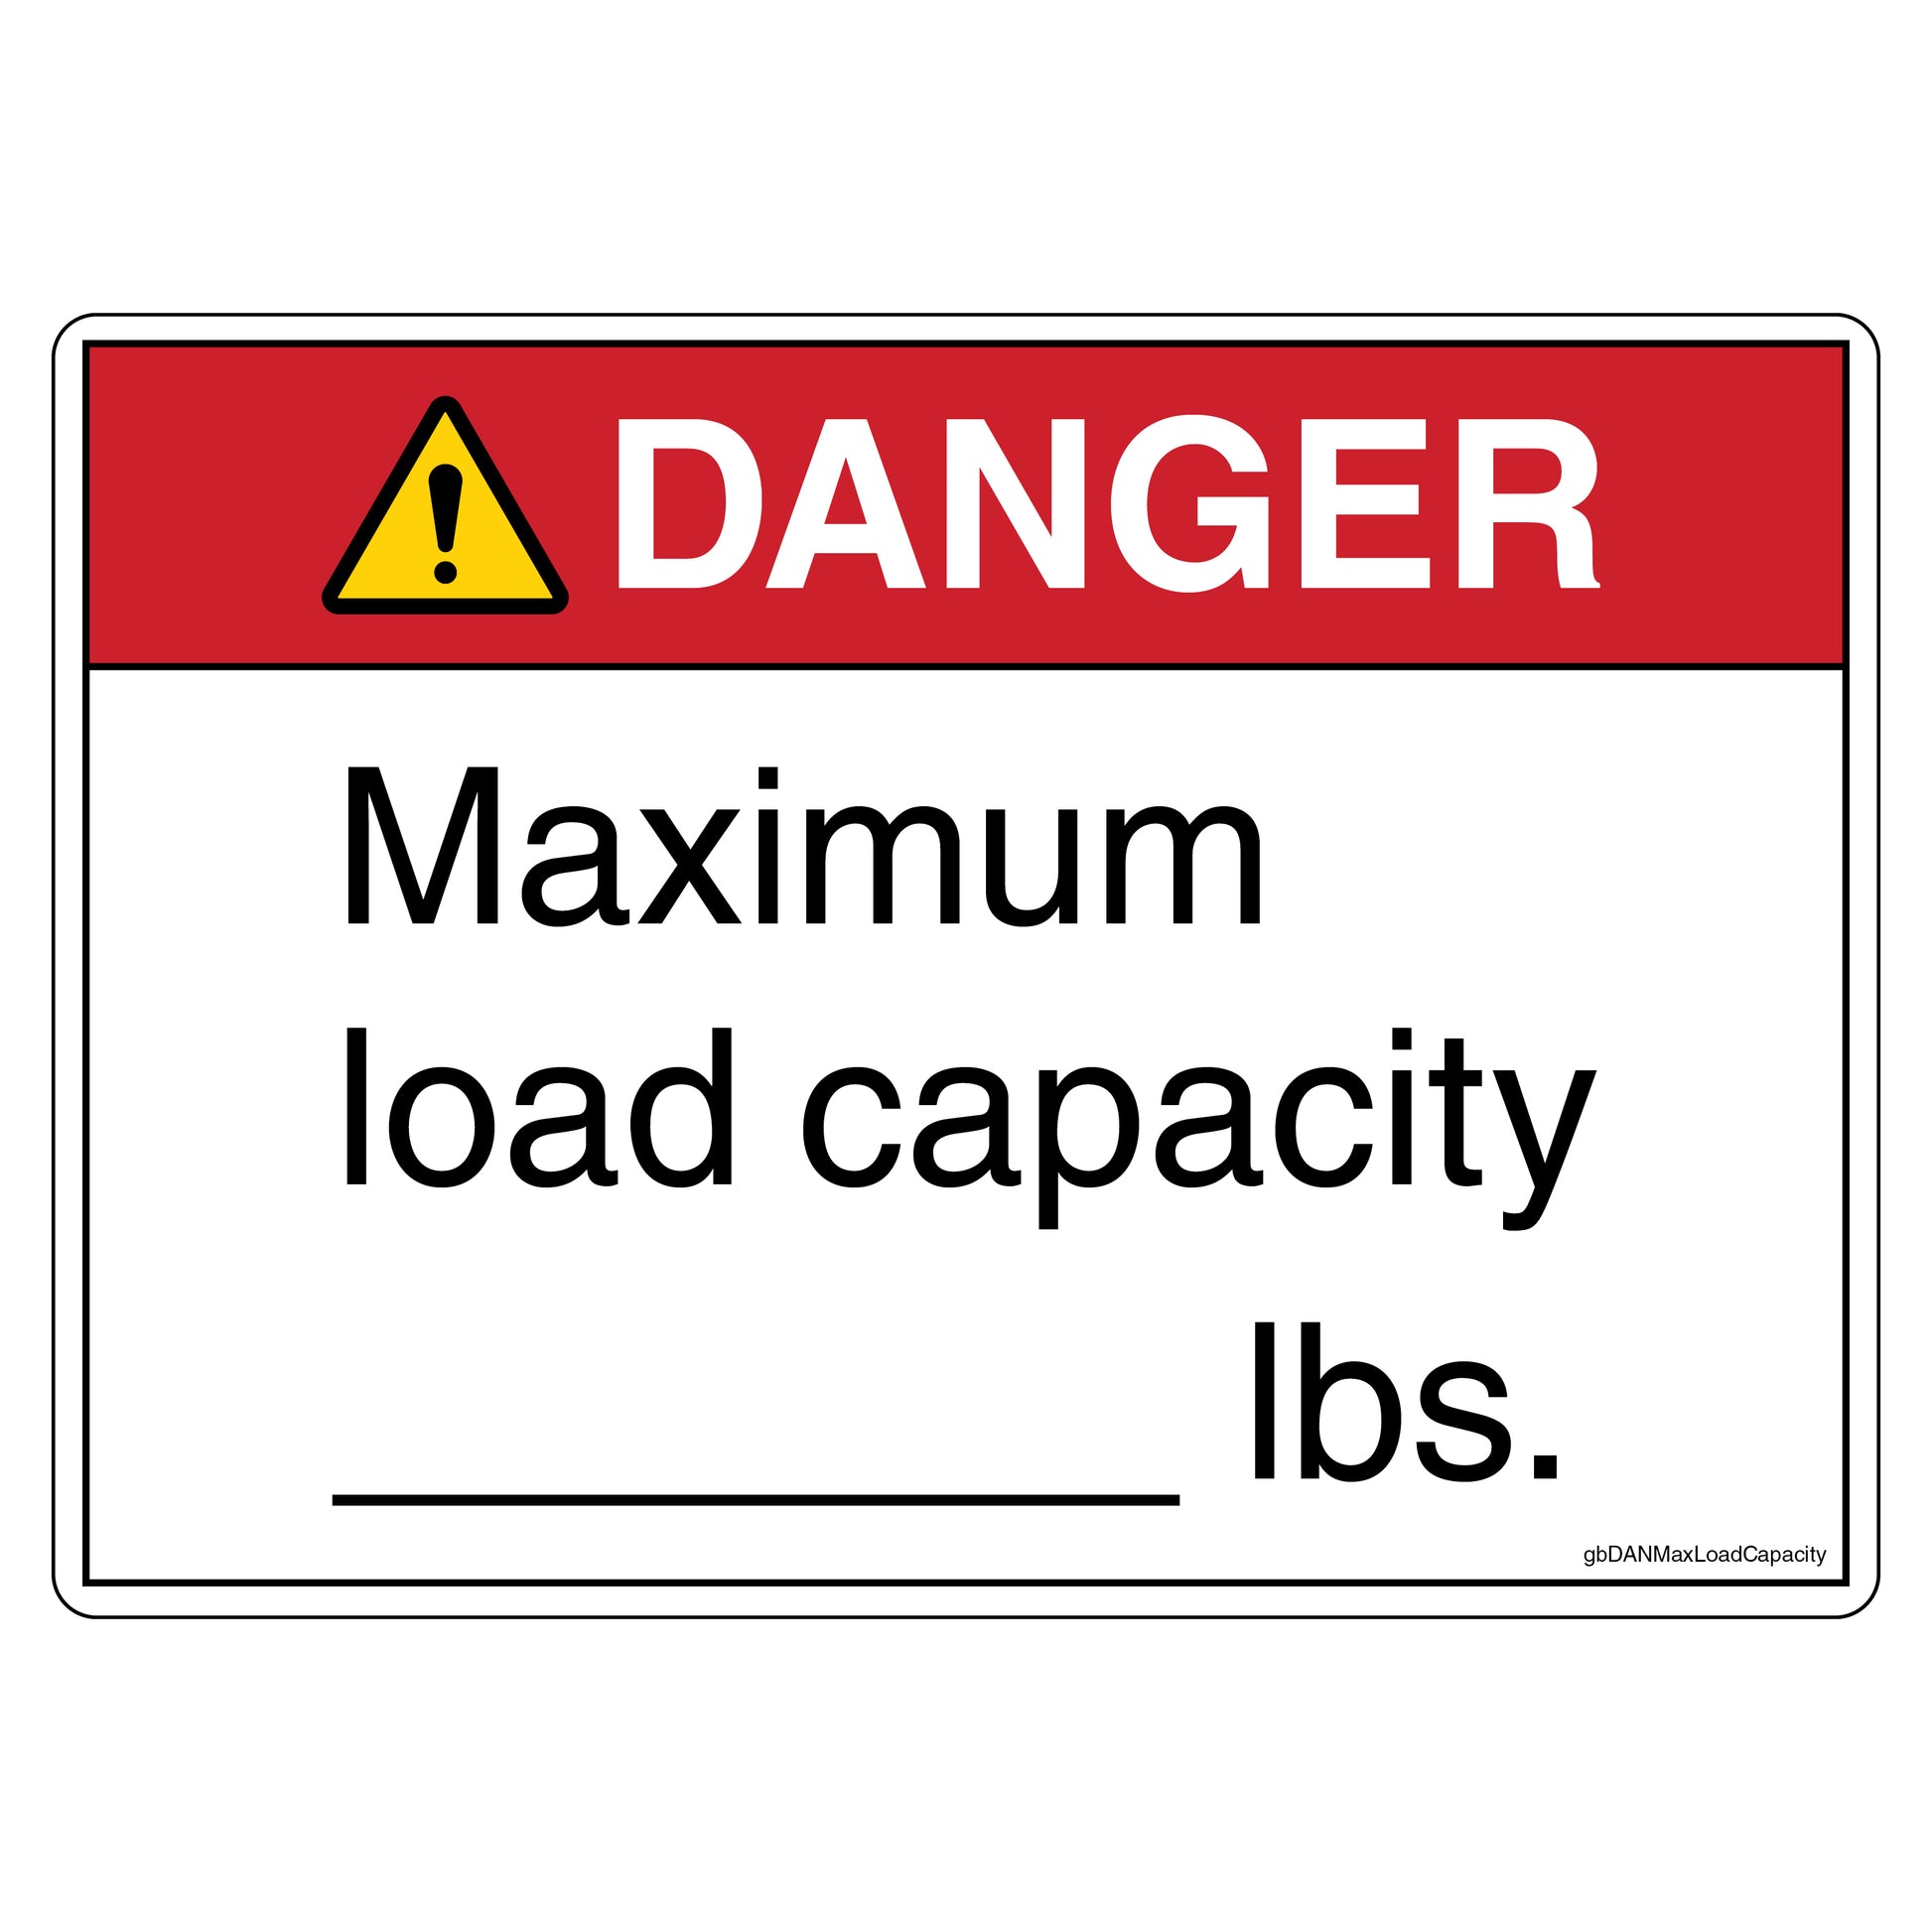 Danger Maximum Load Capacity Decal with Blank Lbs for Customization. 